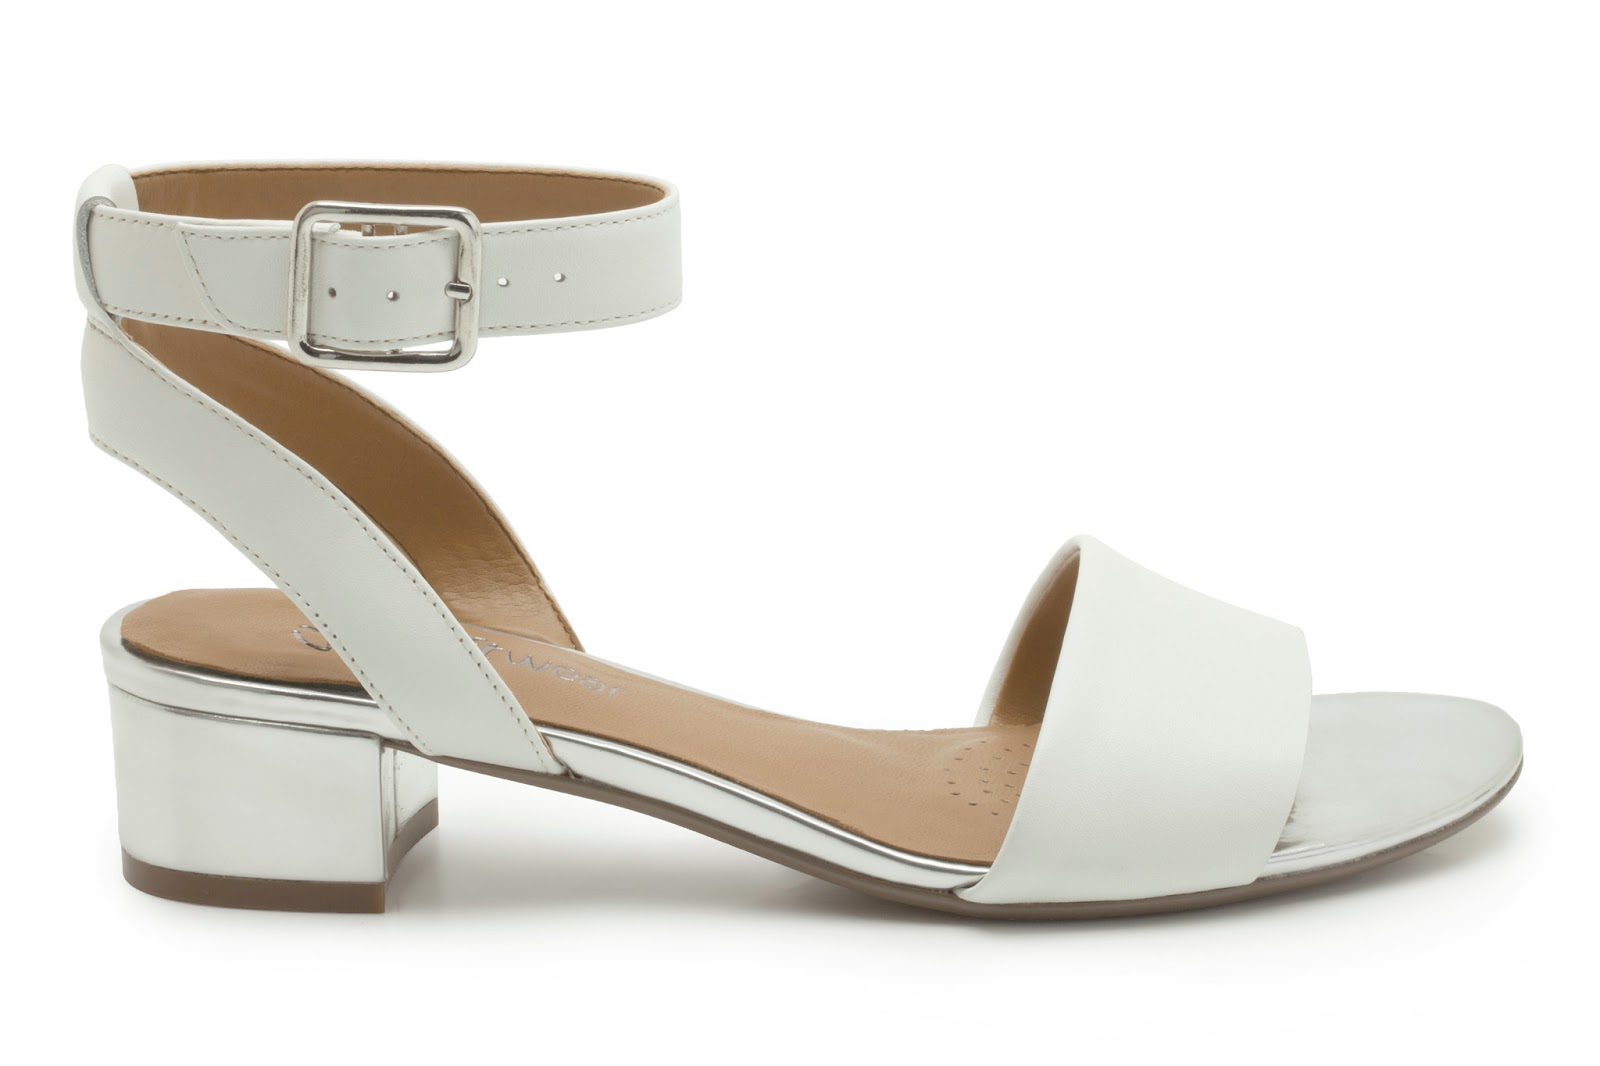 Fashion for grown-ups: mid-heeled sandals